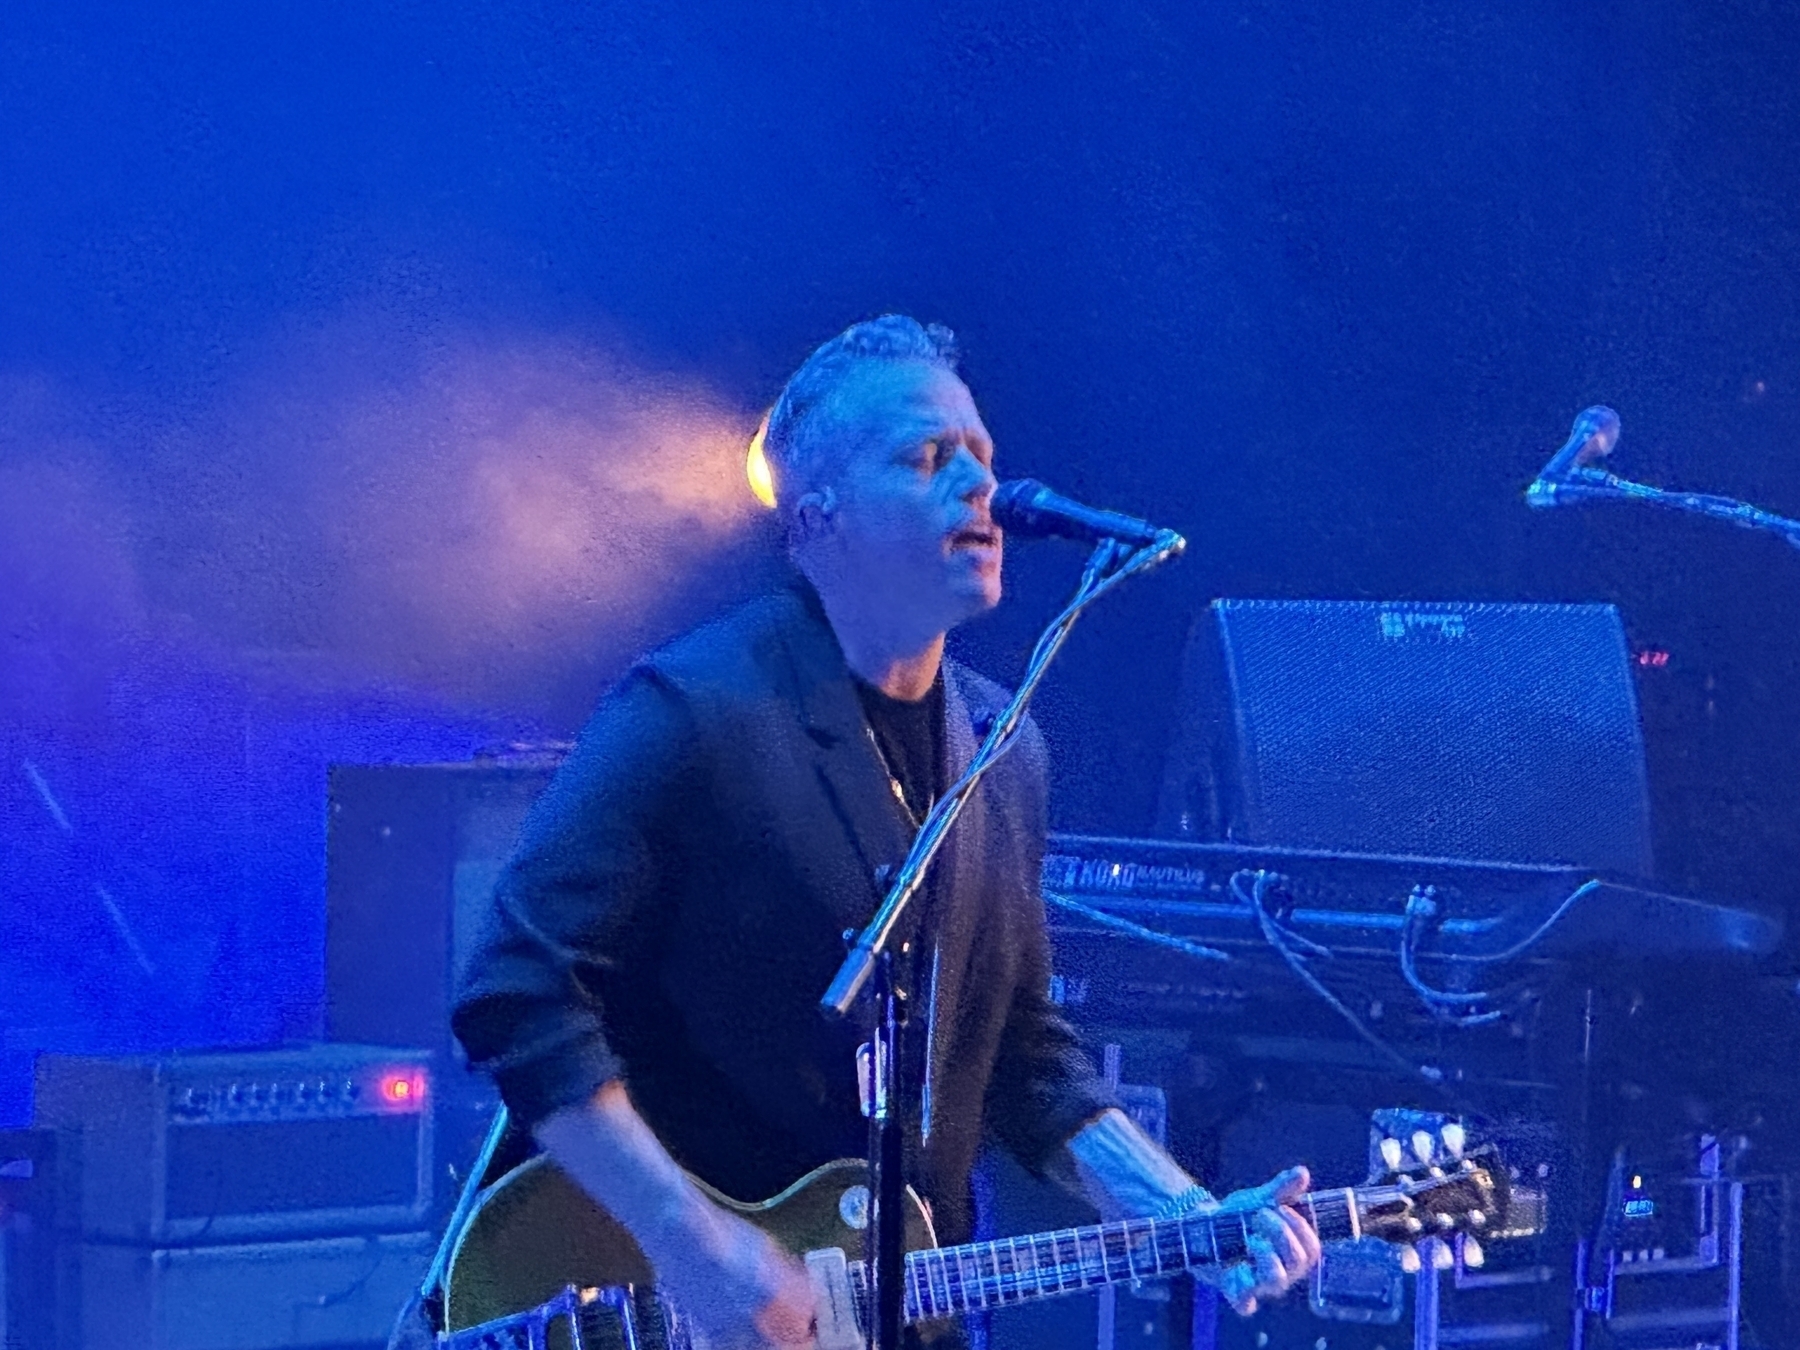 A close up photo of Jason Isbell singing and playing the guitar